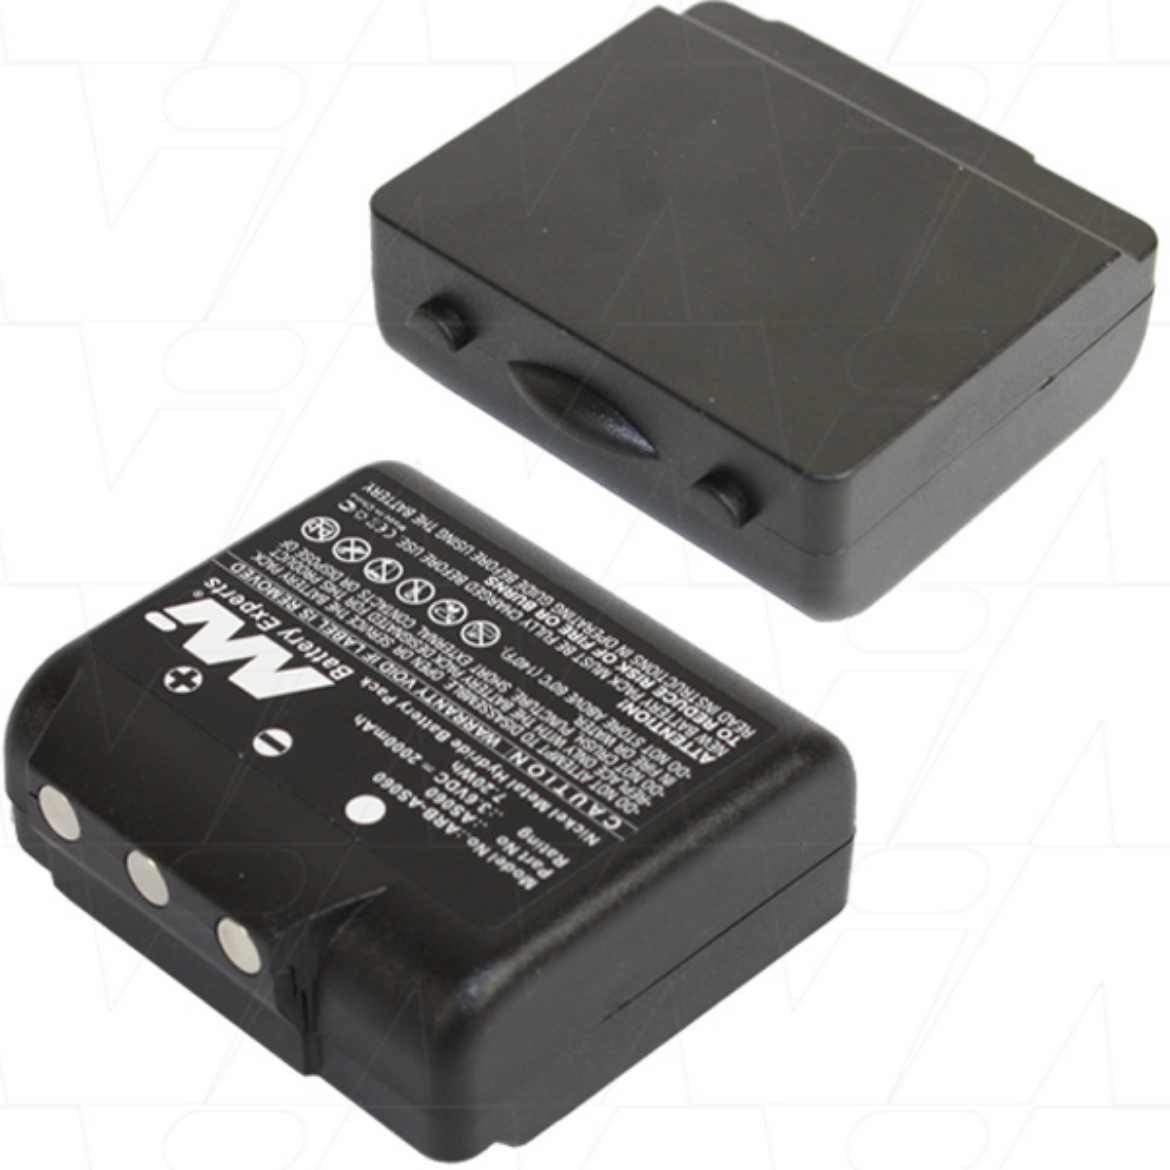 Picture of ARB-AS060 CRANE REMOTE BATTERY 3.6V 2AH 7.2Wh NI-MH